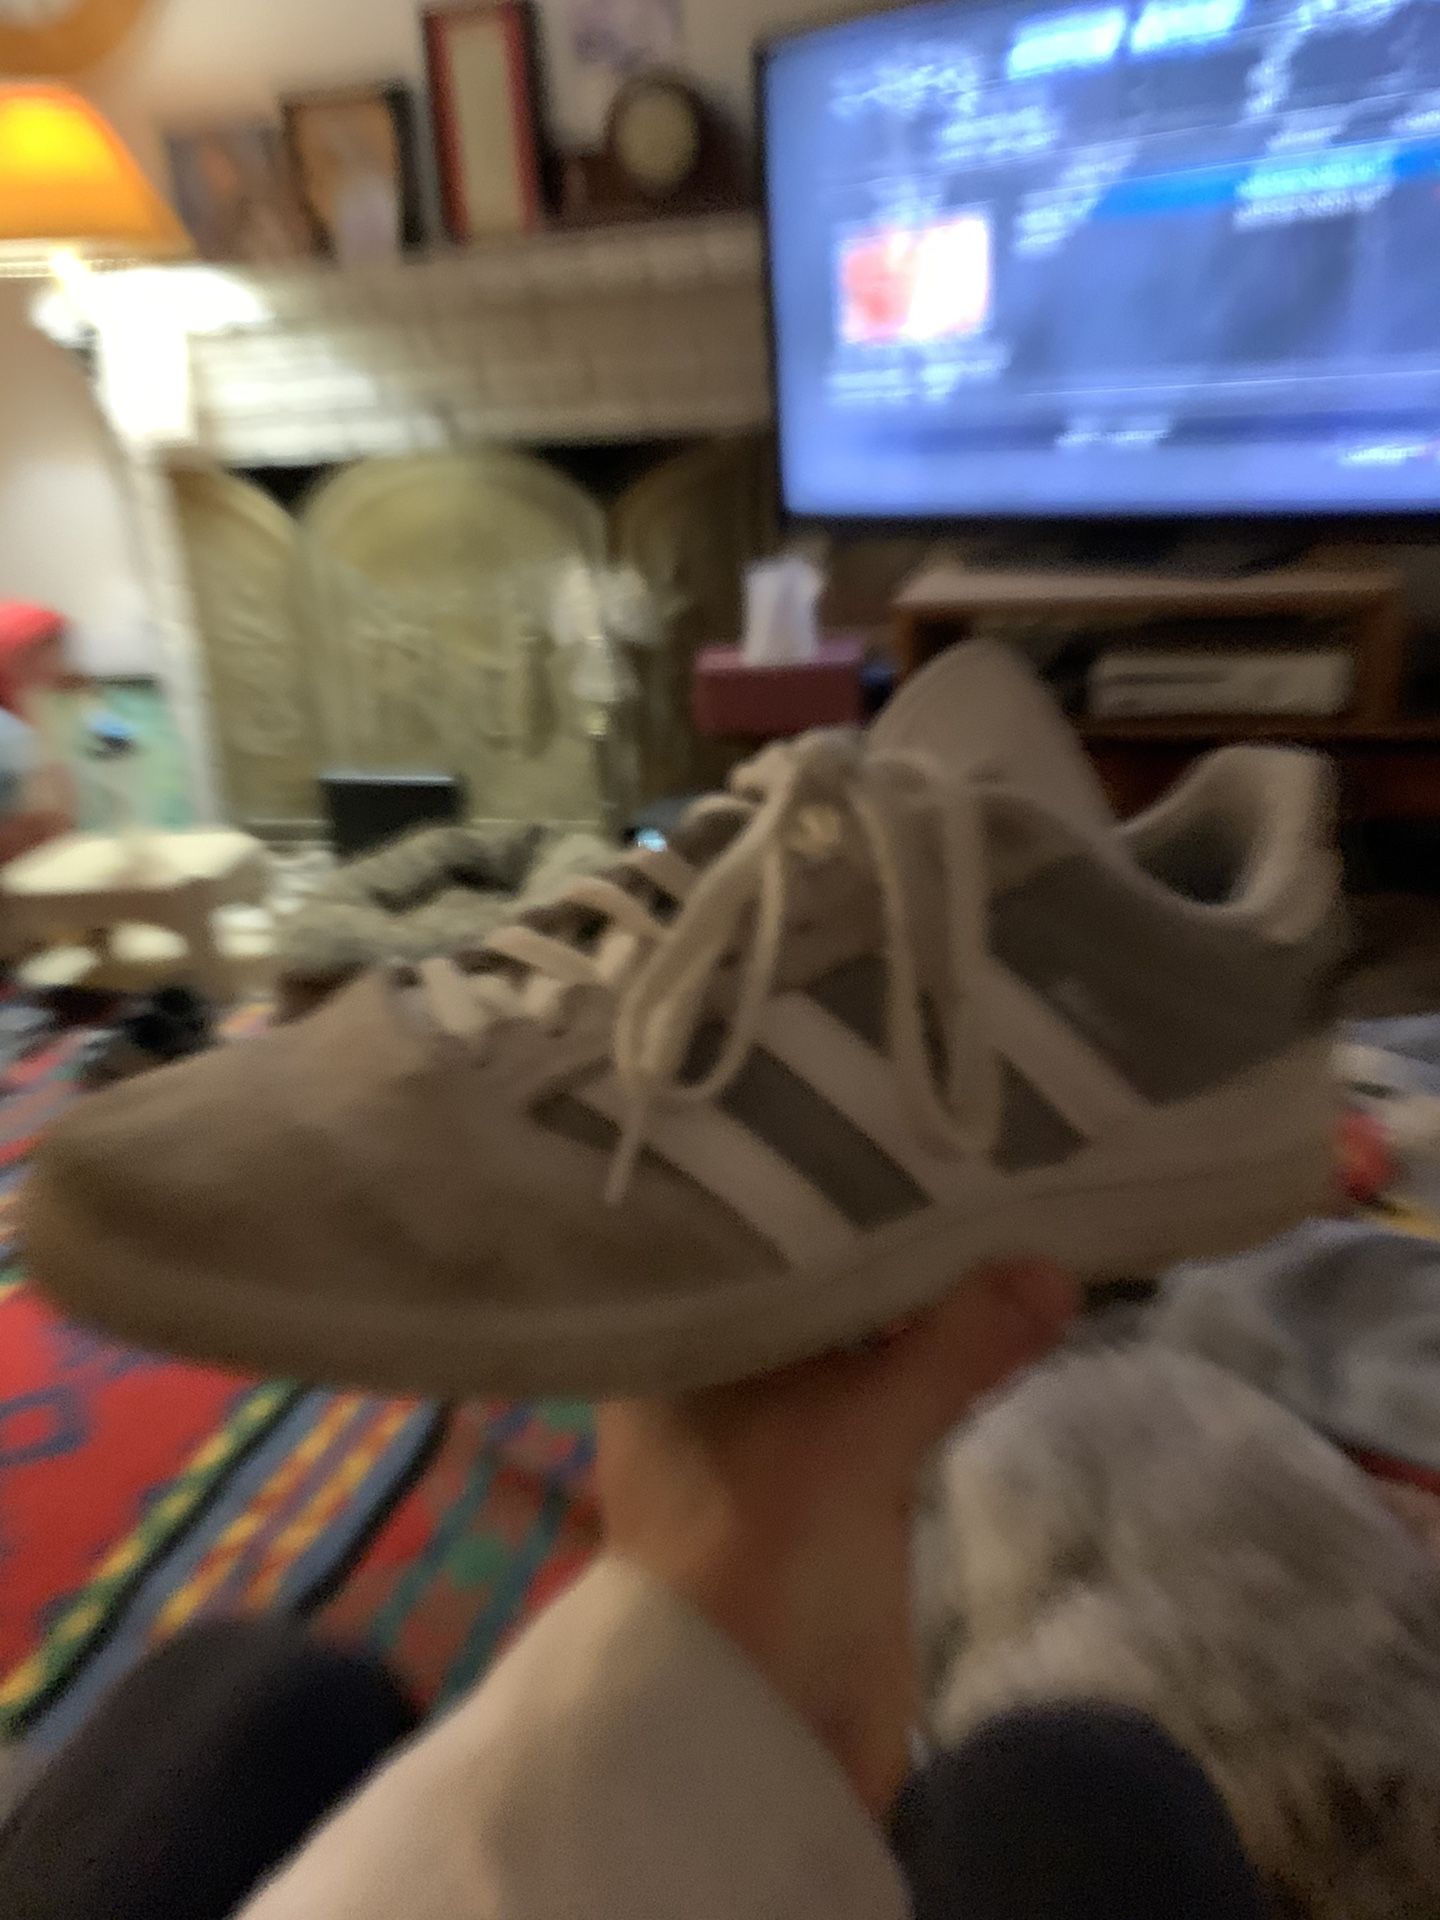 Used adidas busenitz size 9 worn a little skate in like two times still good for skating need cash!! Please help